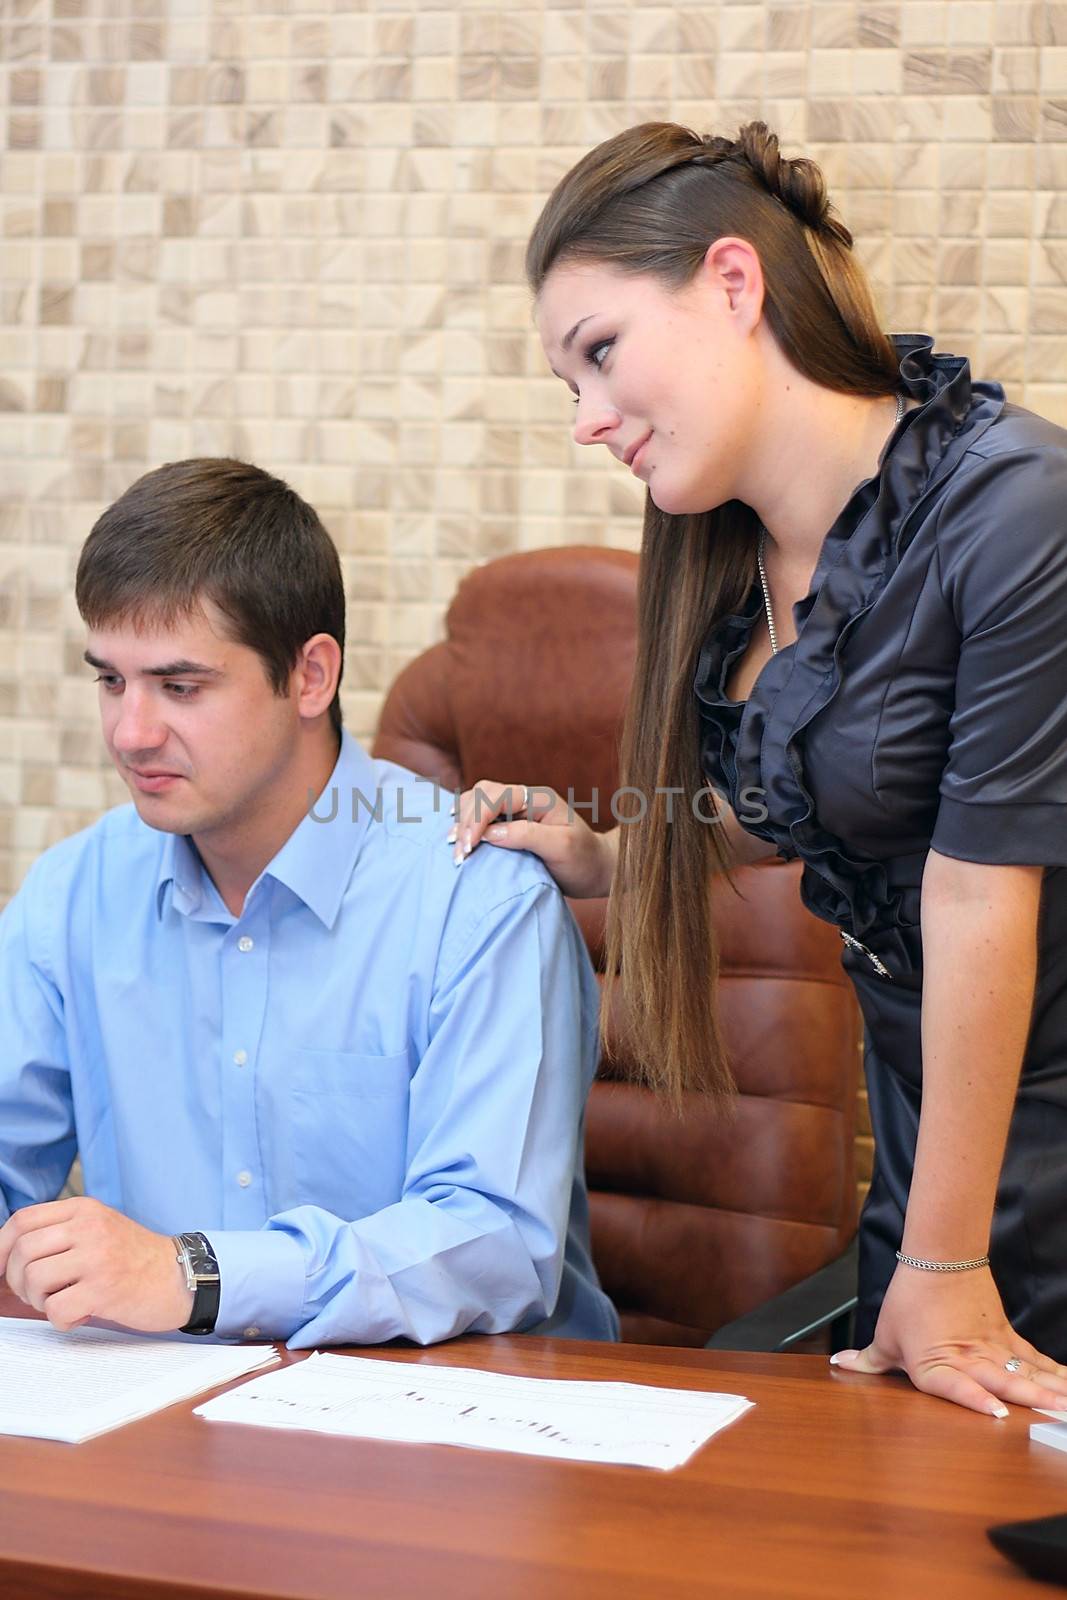 Girl and man working together in the office with papers